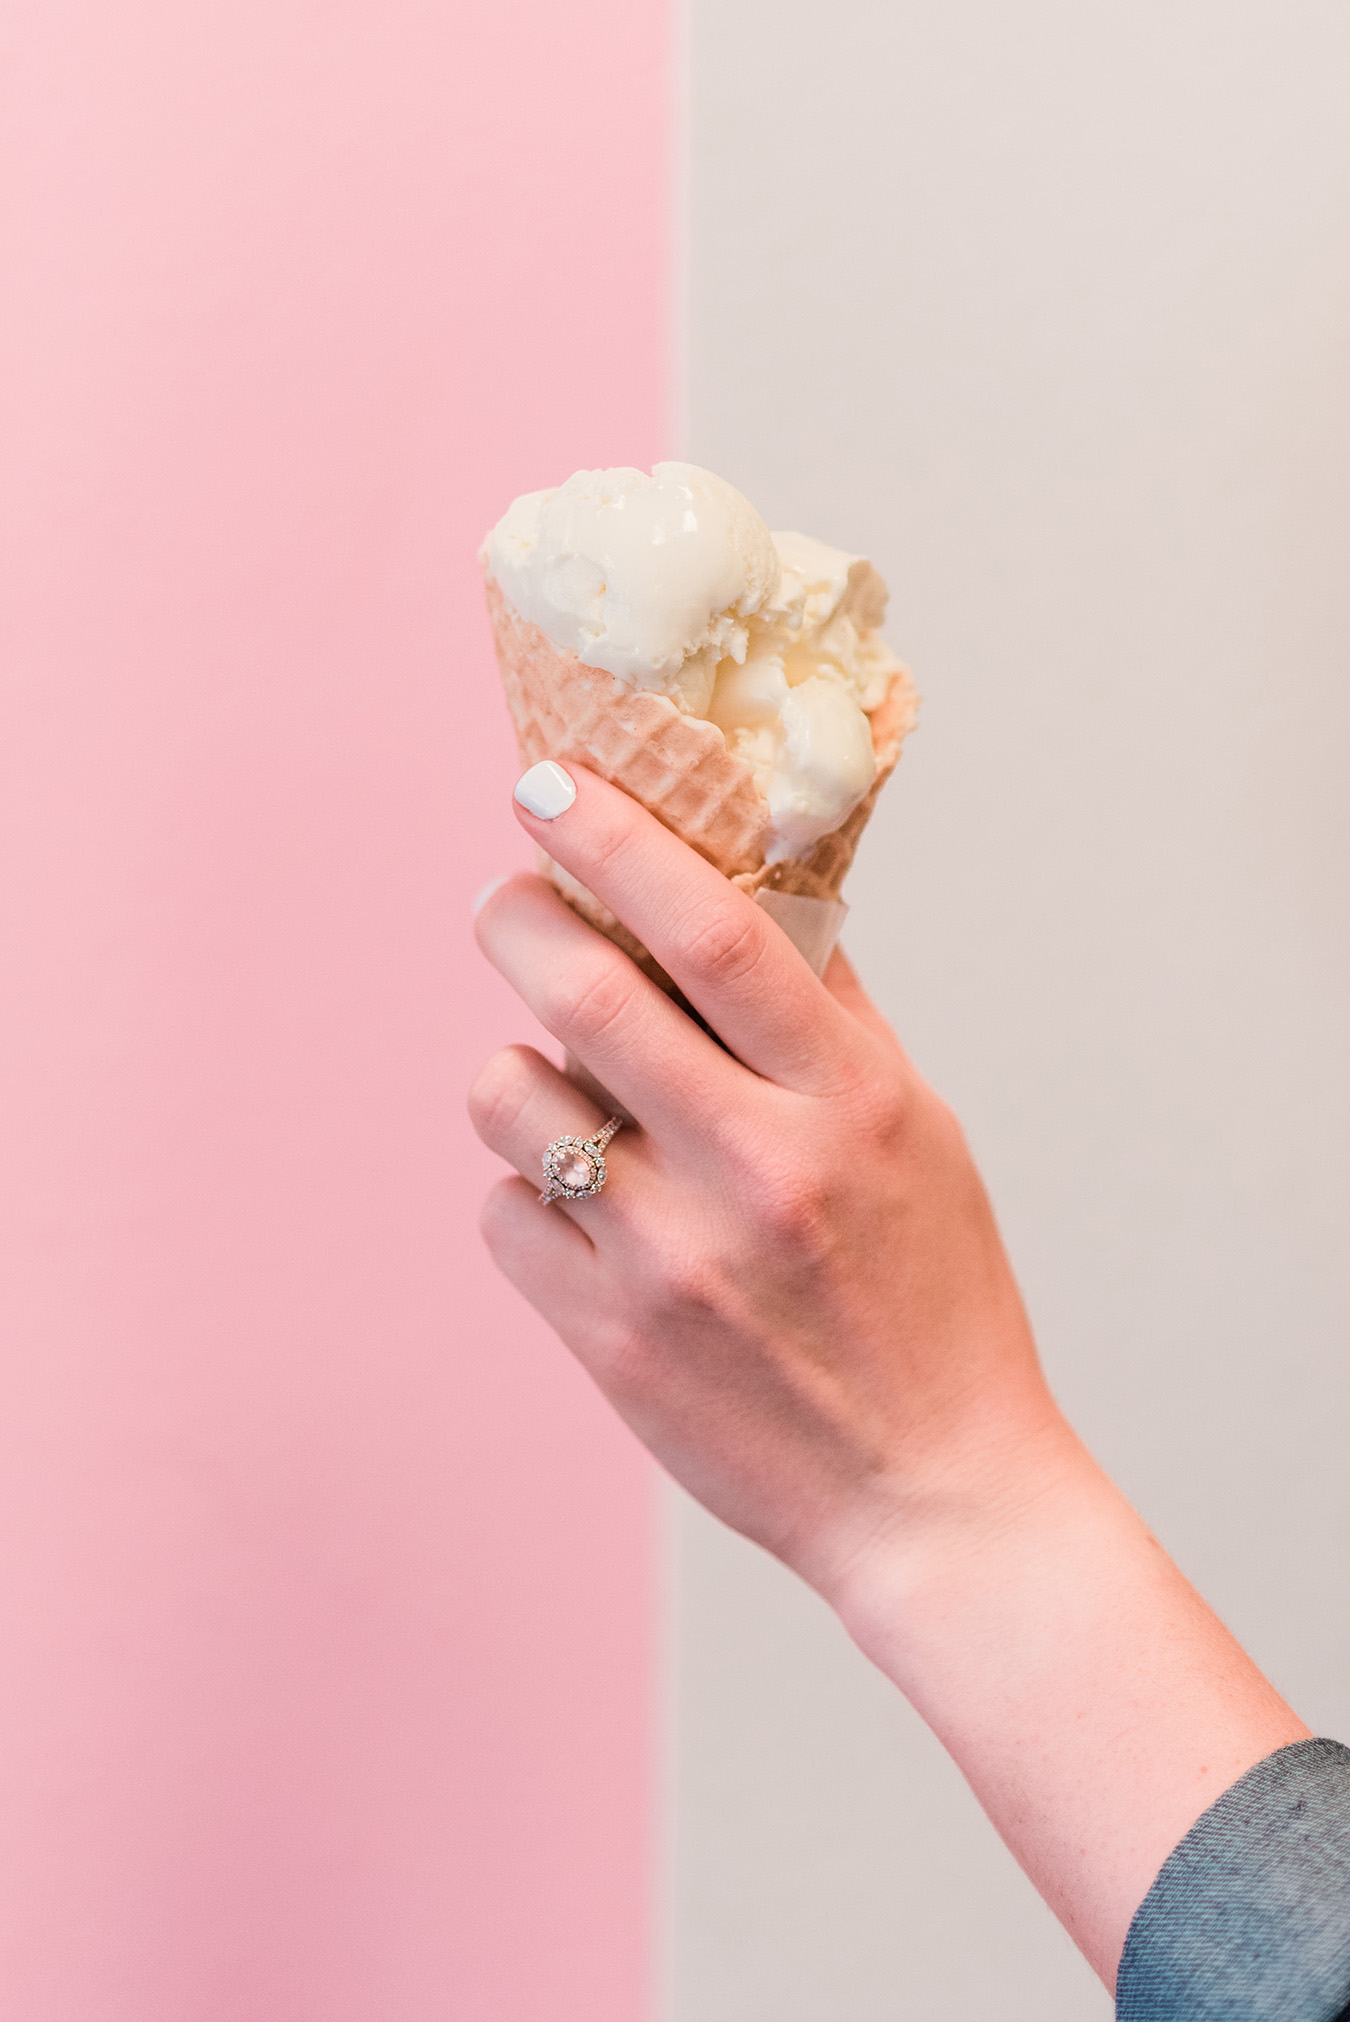 Ice cream cone and engagement ring